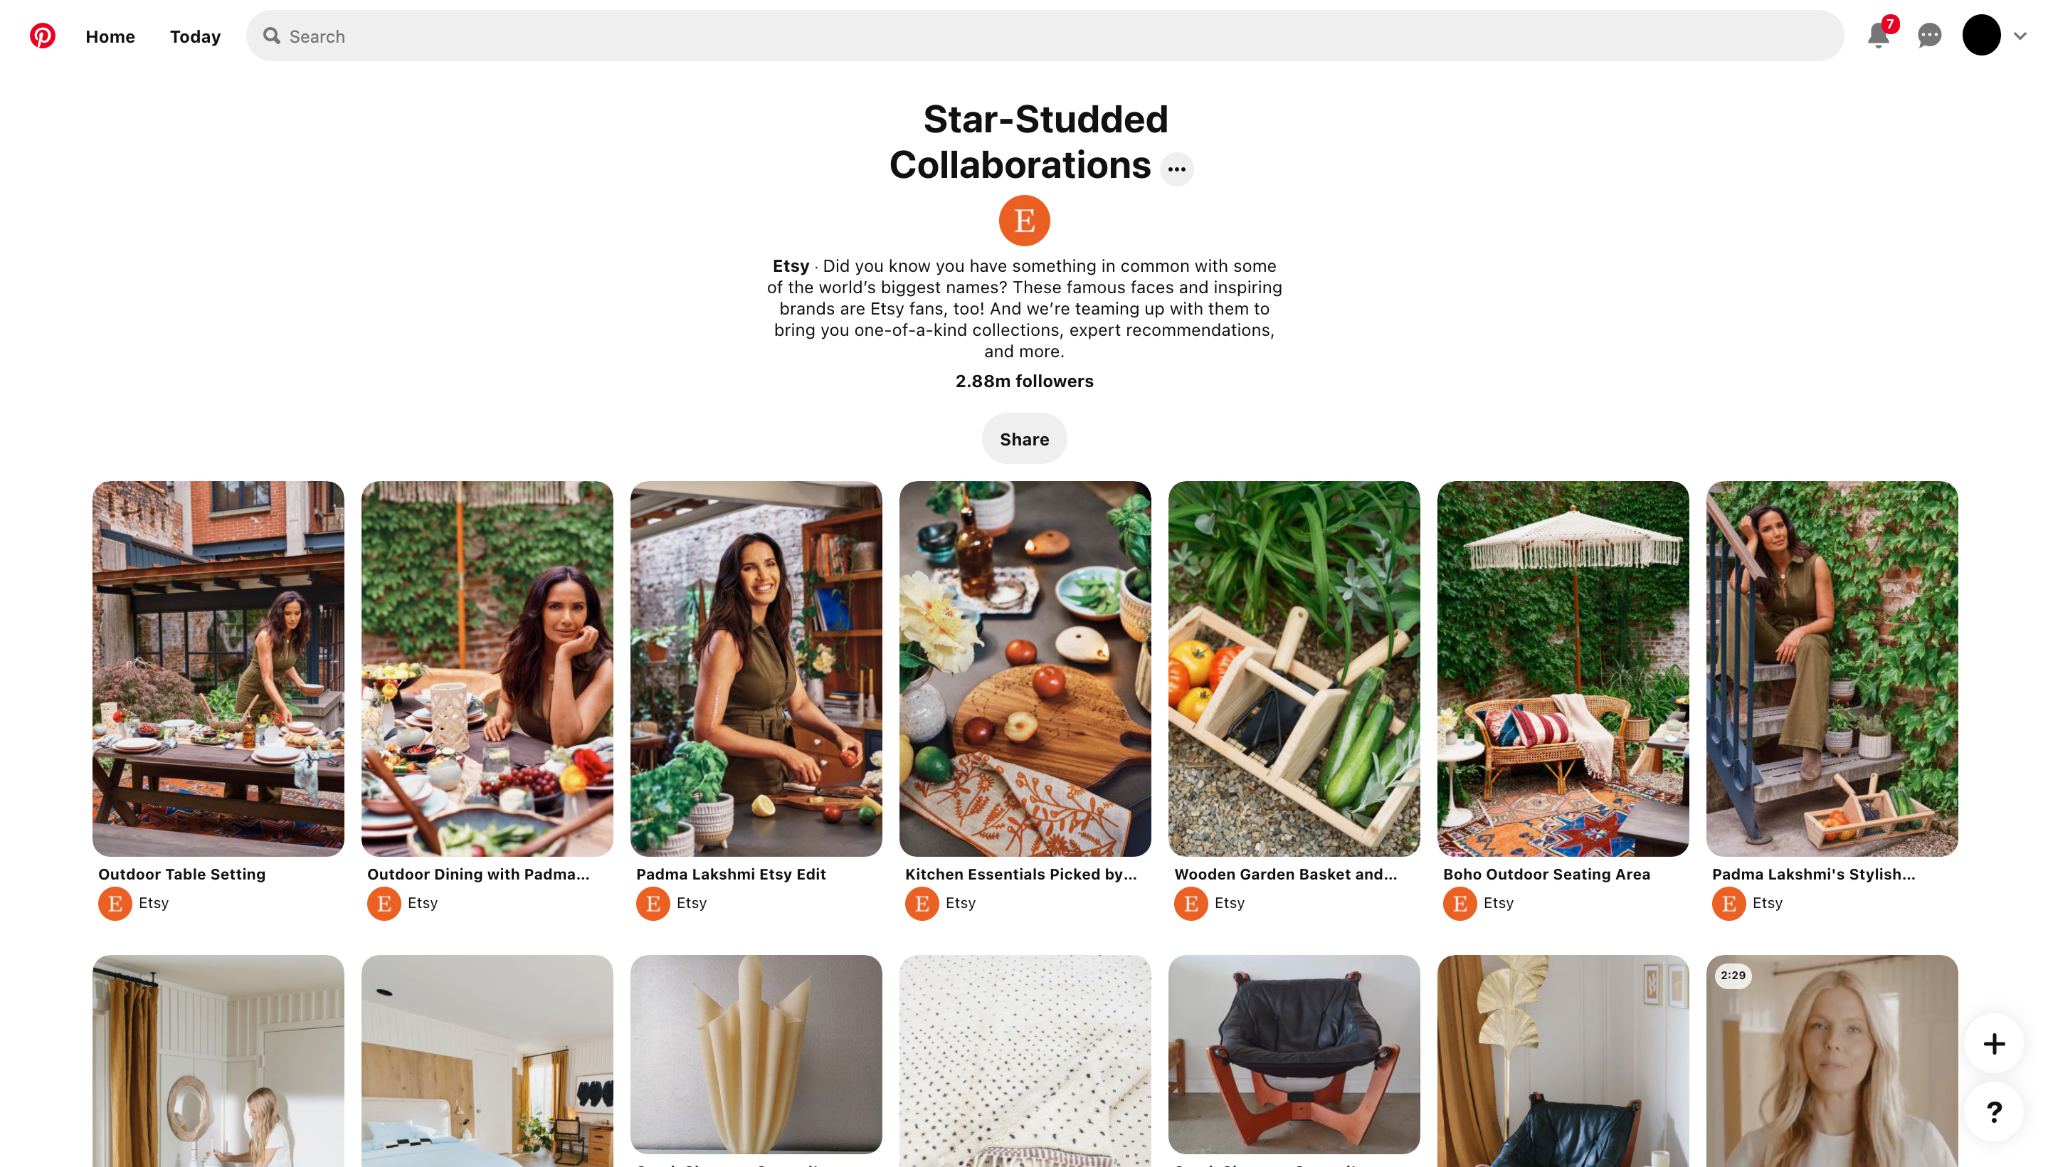 guest Pinterest board ideas with collaborators 